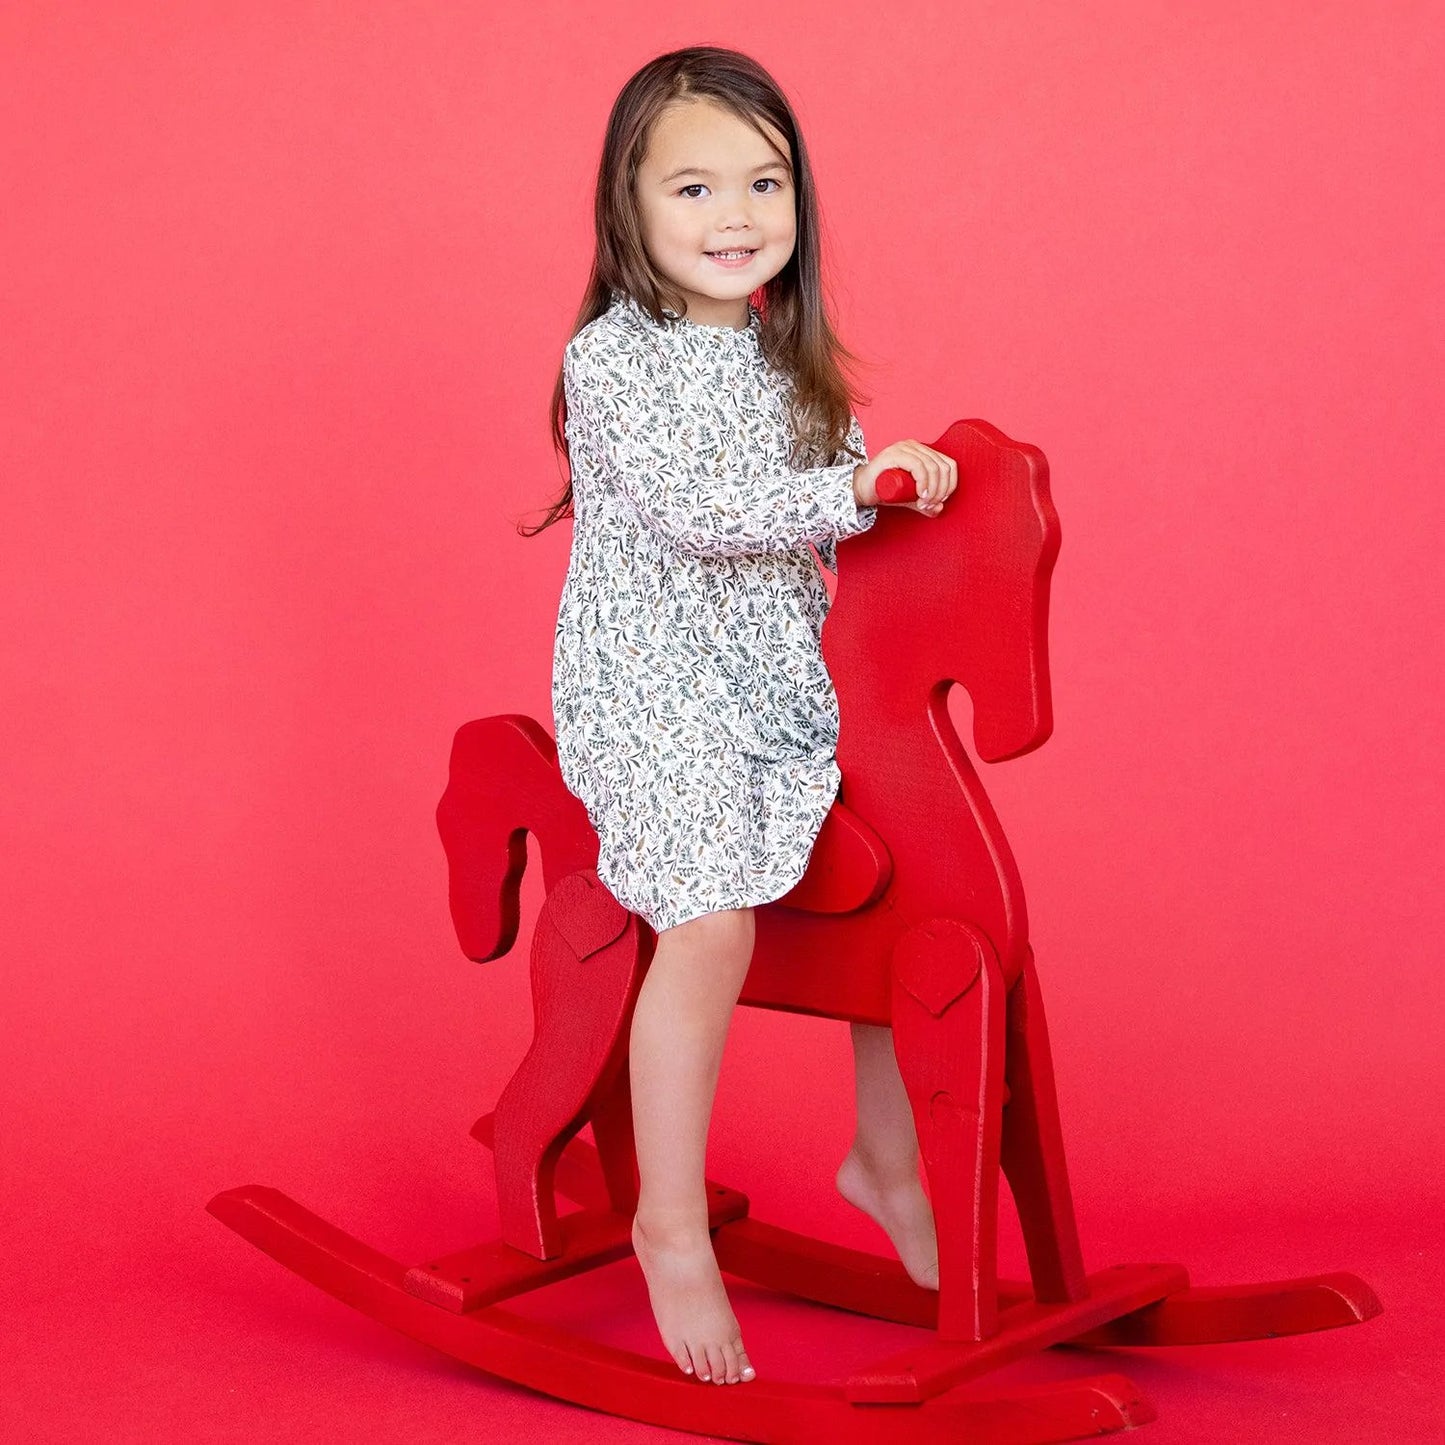 Awesome balsam modal magnetic toddler ruffle dress